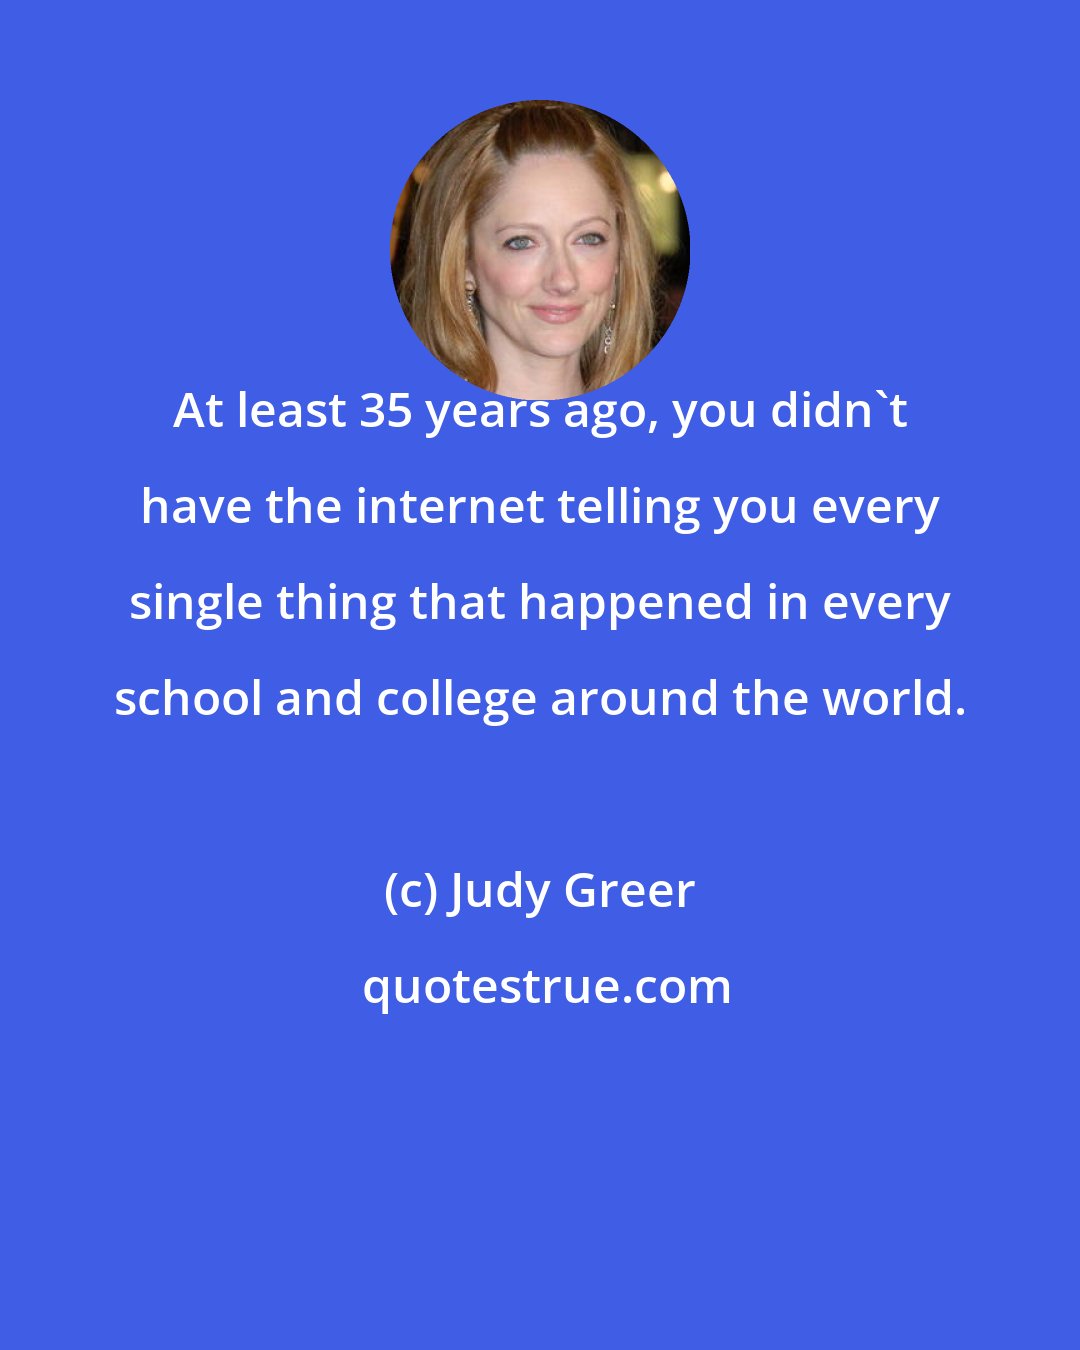 Judy Greer: At least 35 years ago, you didn't have the internet telling you every single thing that happened in every school and college around the world.